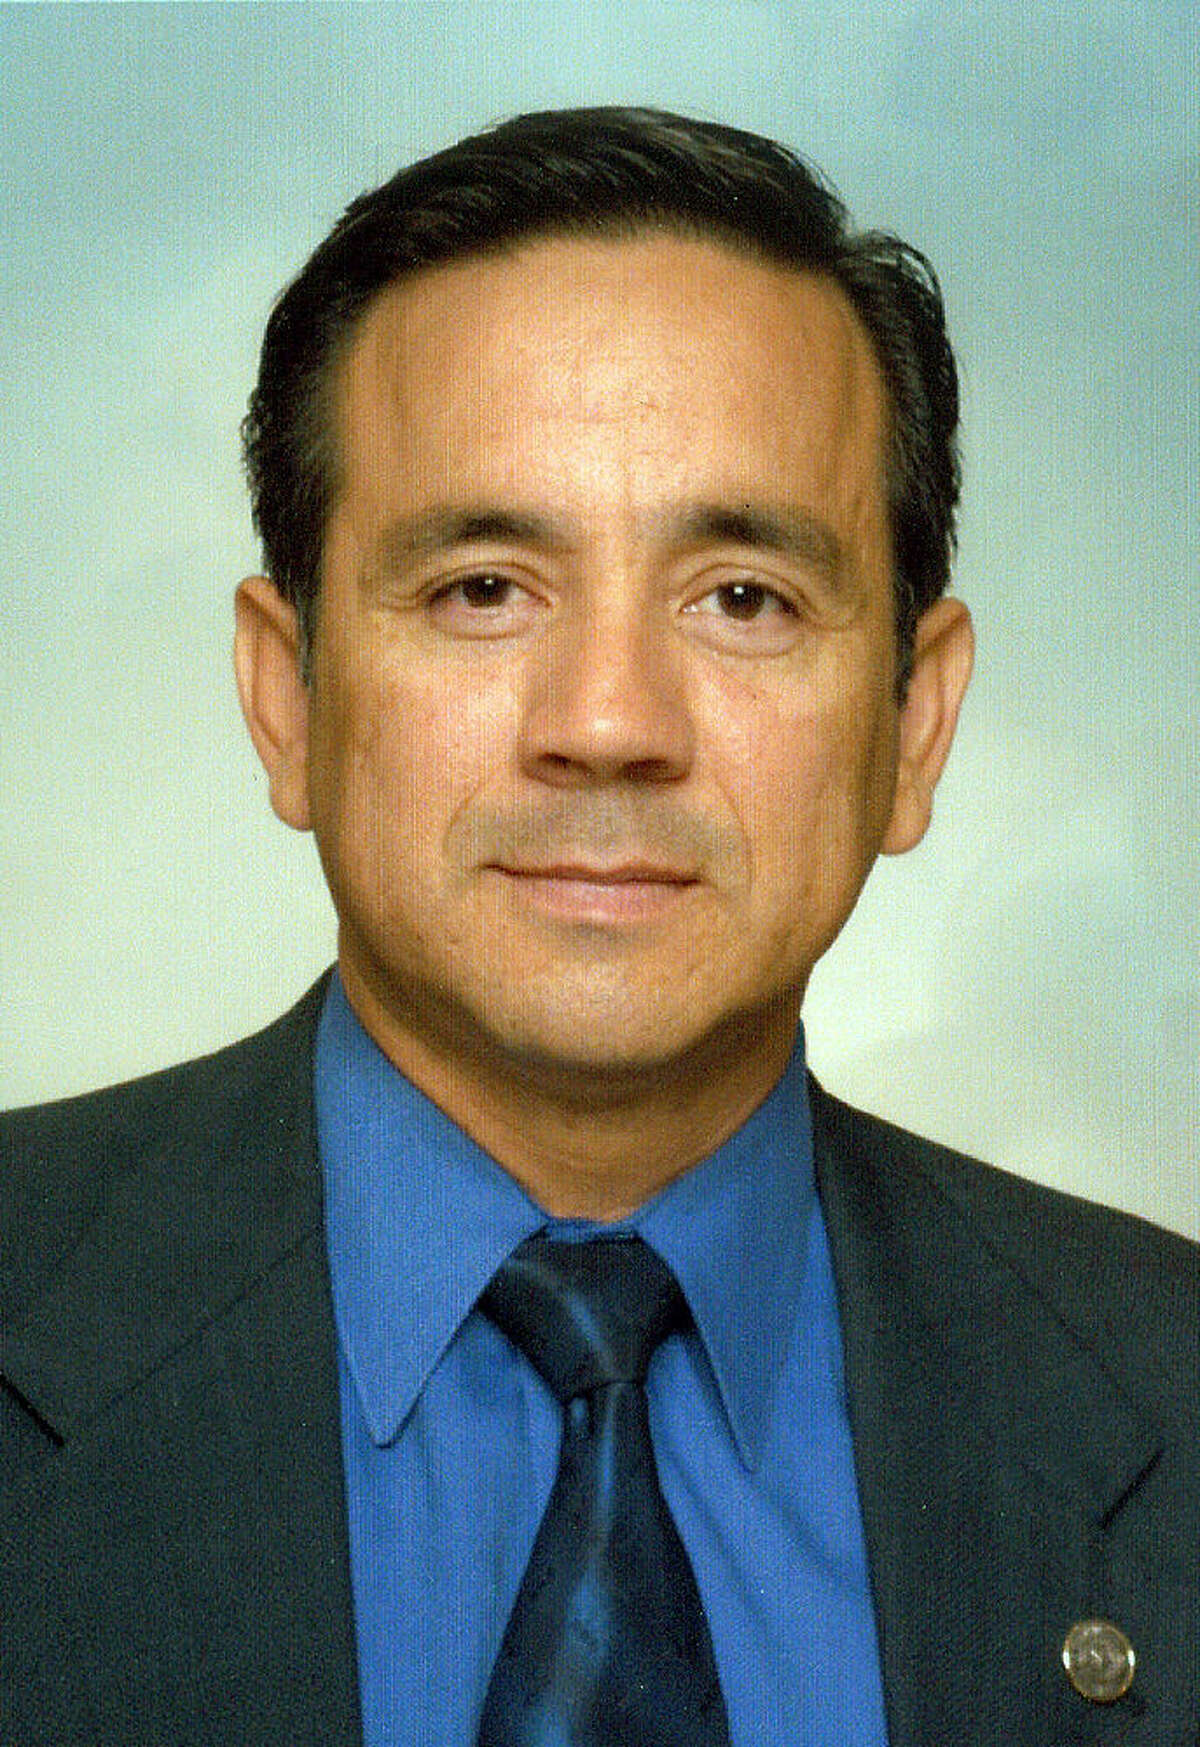 Sen. Carlos Uresti said, “I don't want to create barriers for women to access health services.”